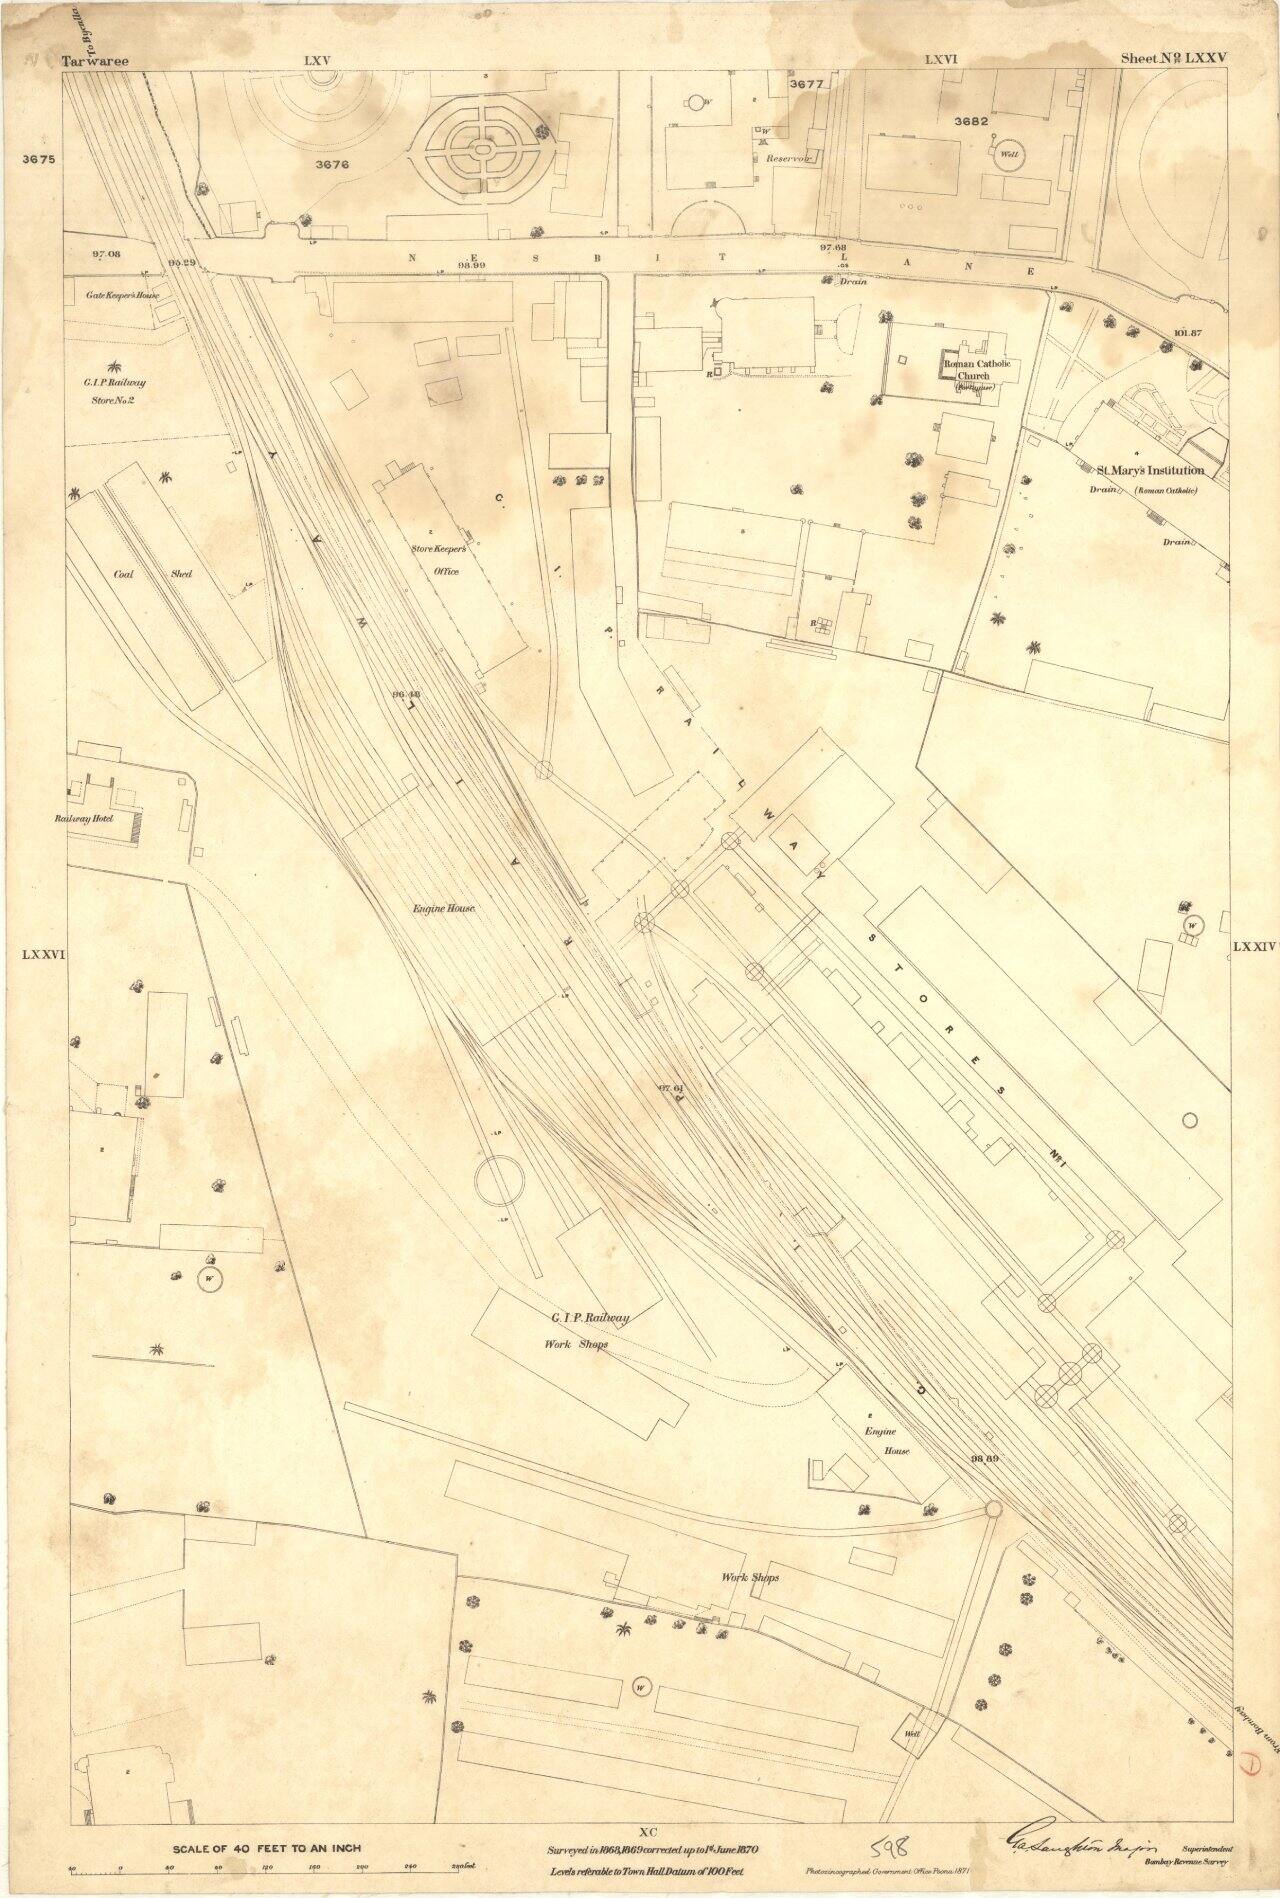 598-Tarwaree: A map showing part of Tarwaree in Bombay from the Second Bombay Revenue Survey conducted under Laughton.